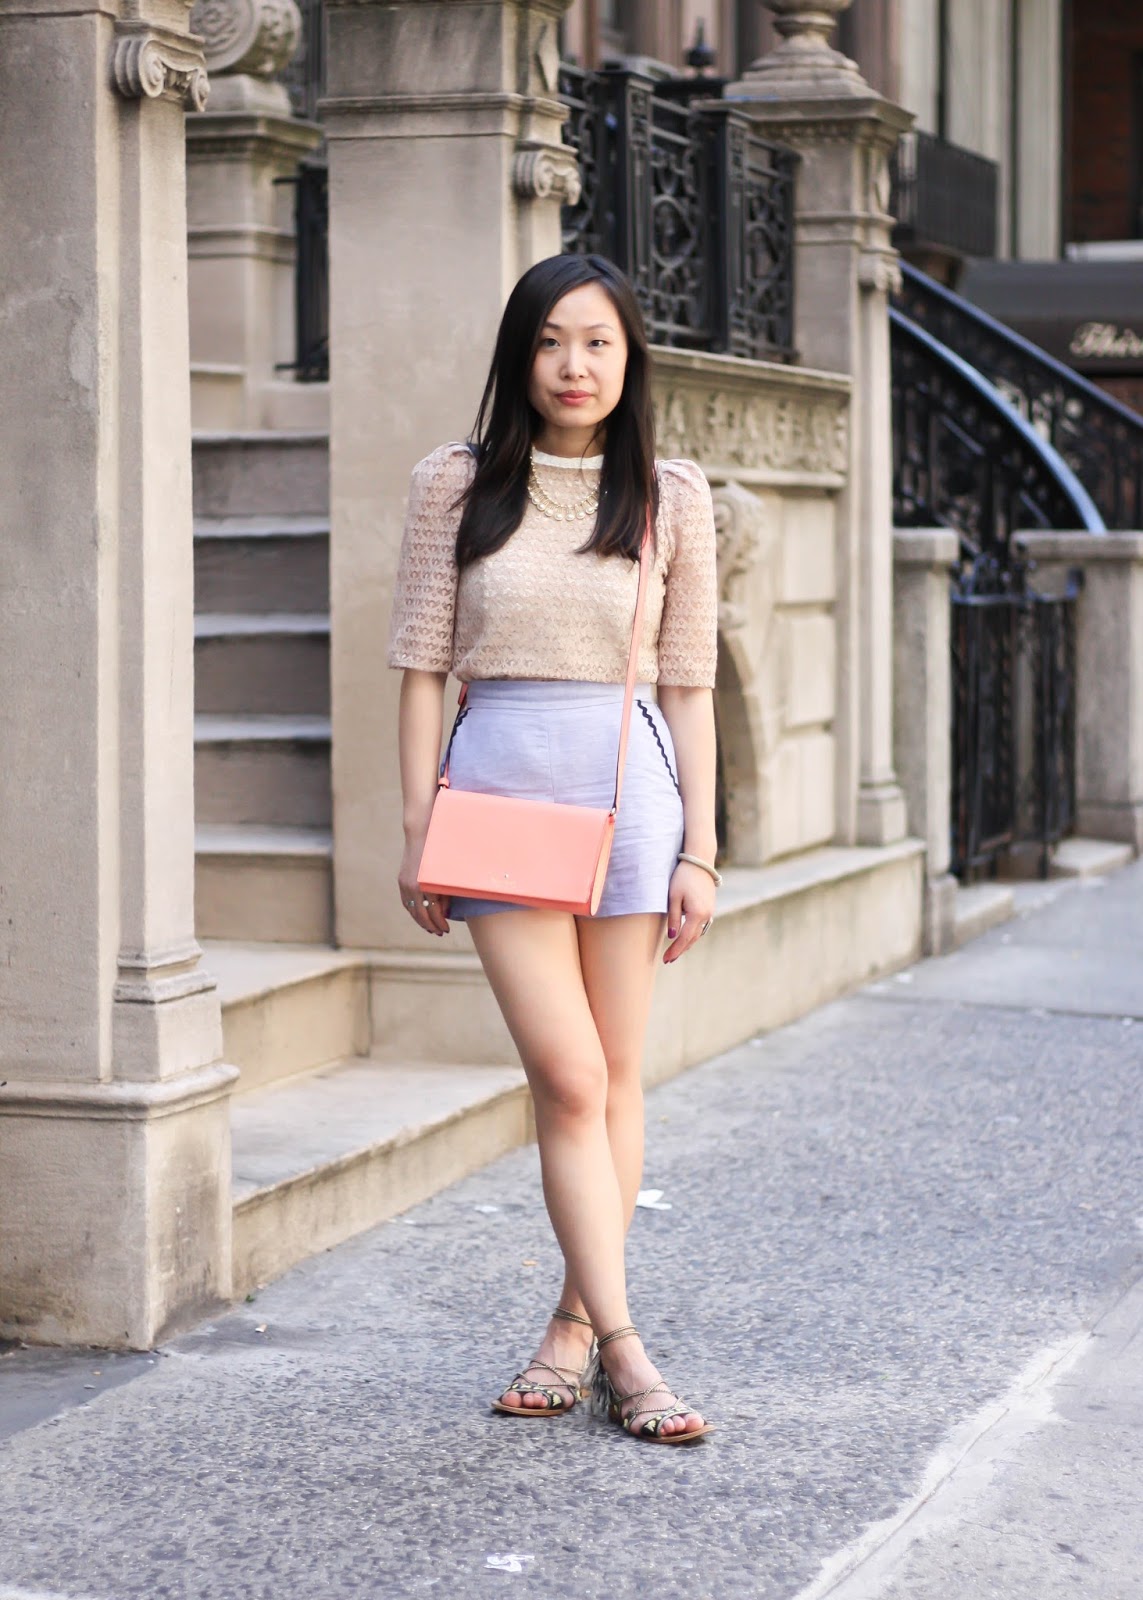 High-Waist Cotton Shorts and Lace Top Outfit